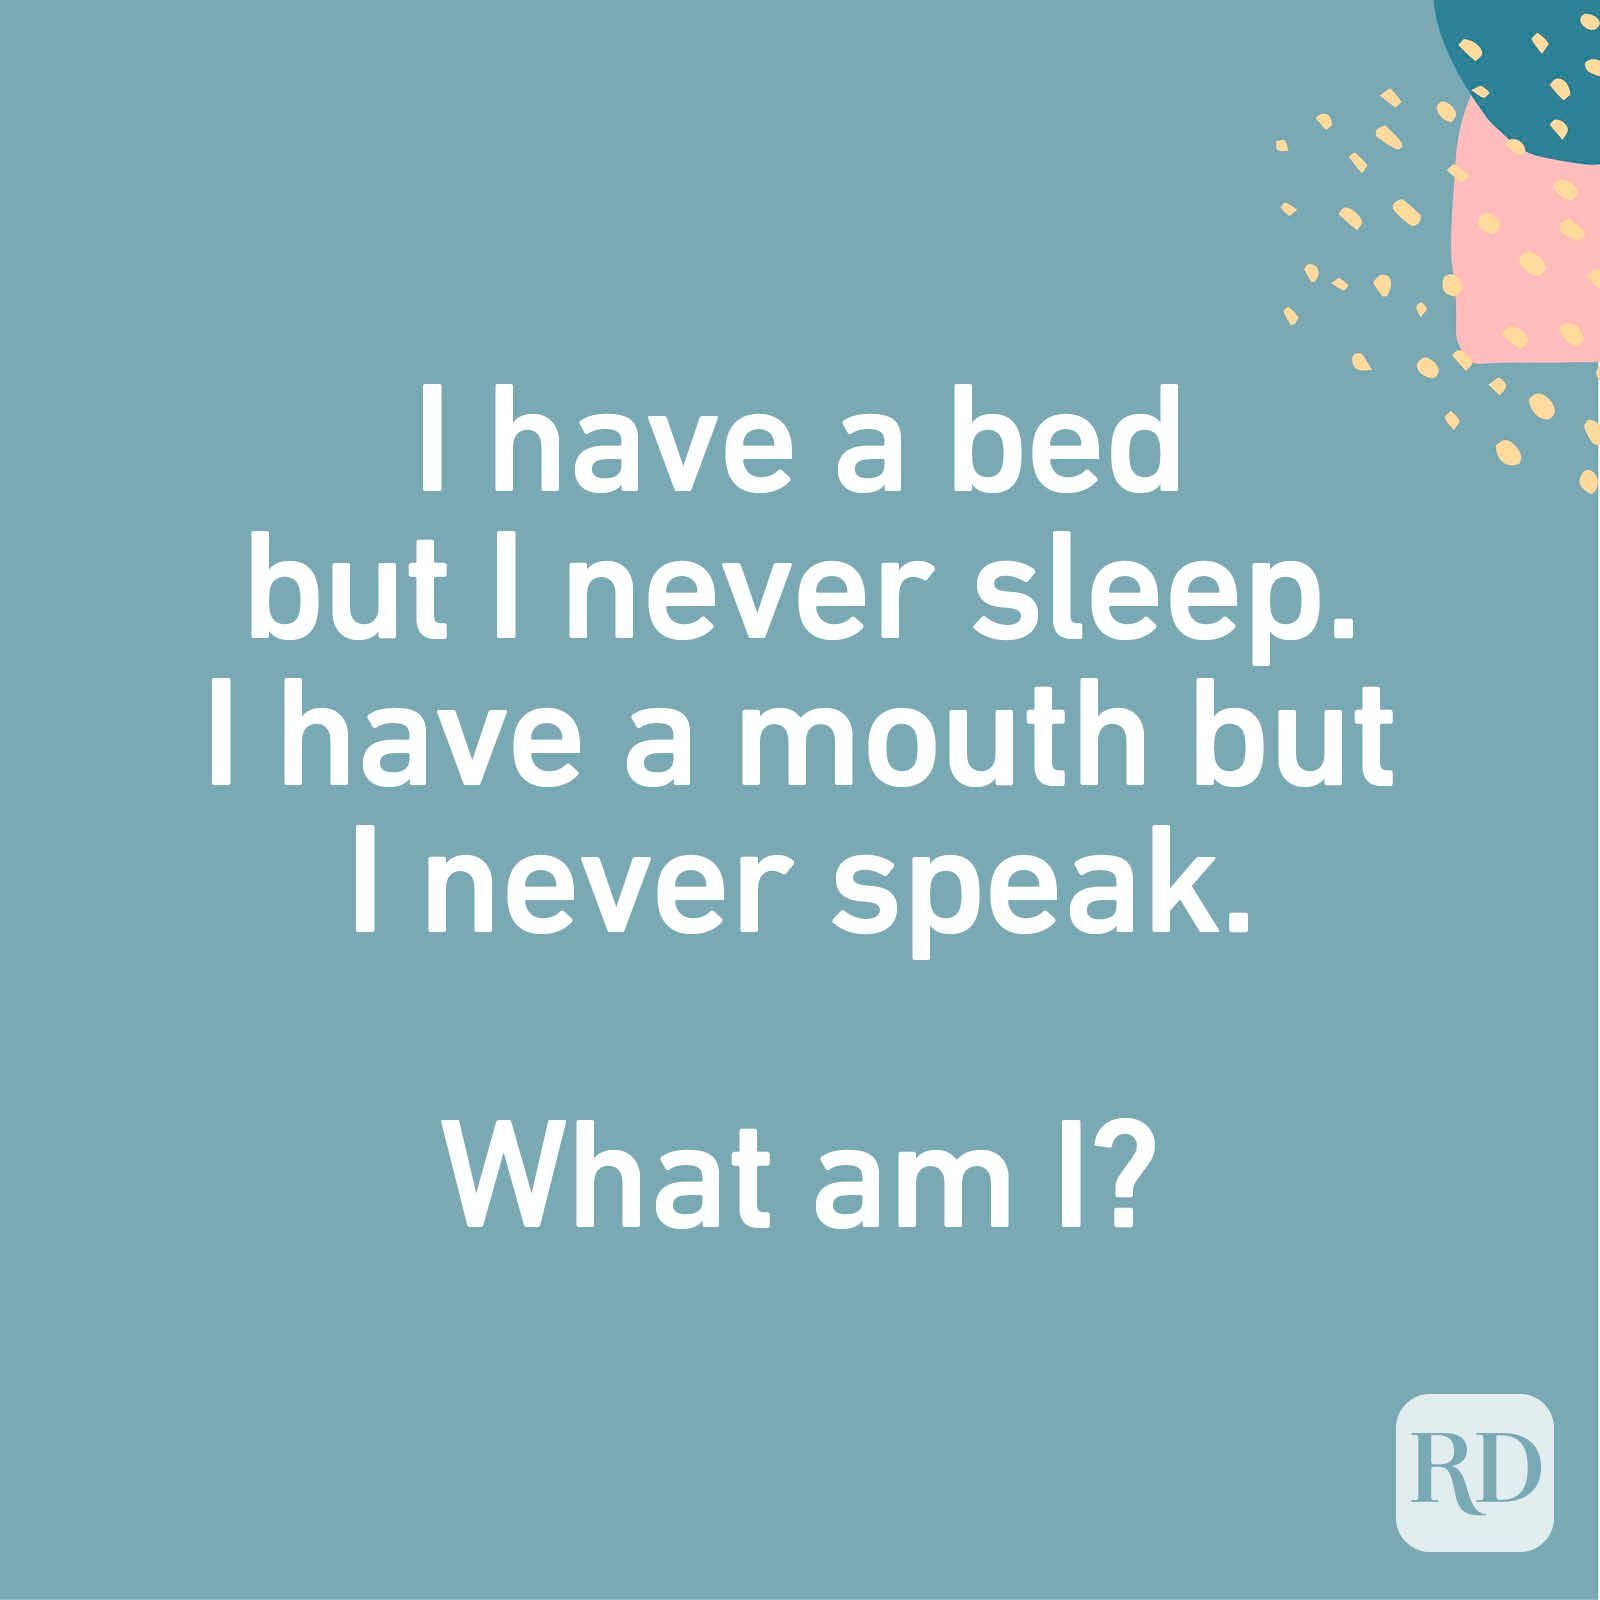 I have a bed but I never sleep. I have a mouth but I never speak. What am I?